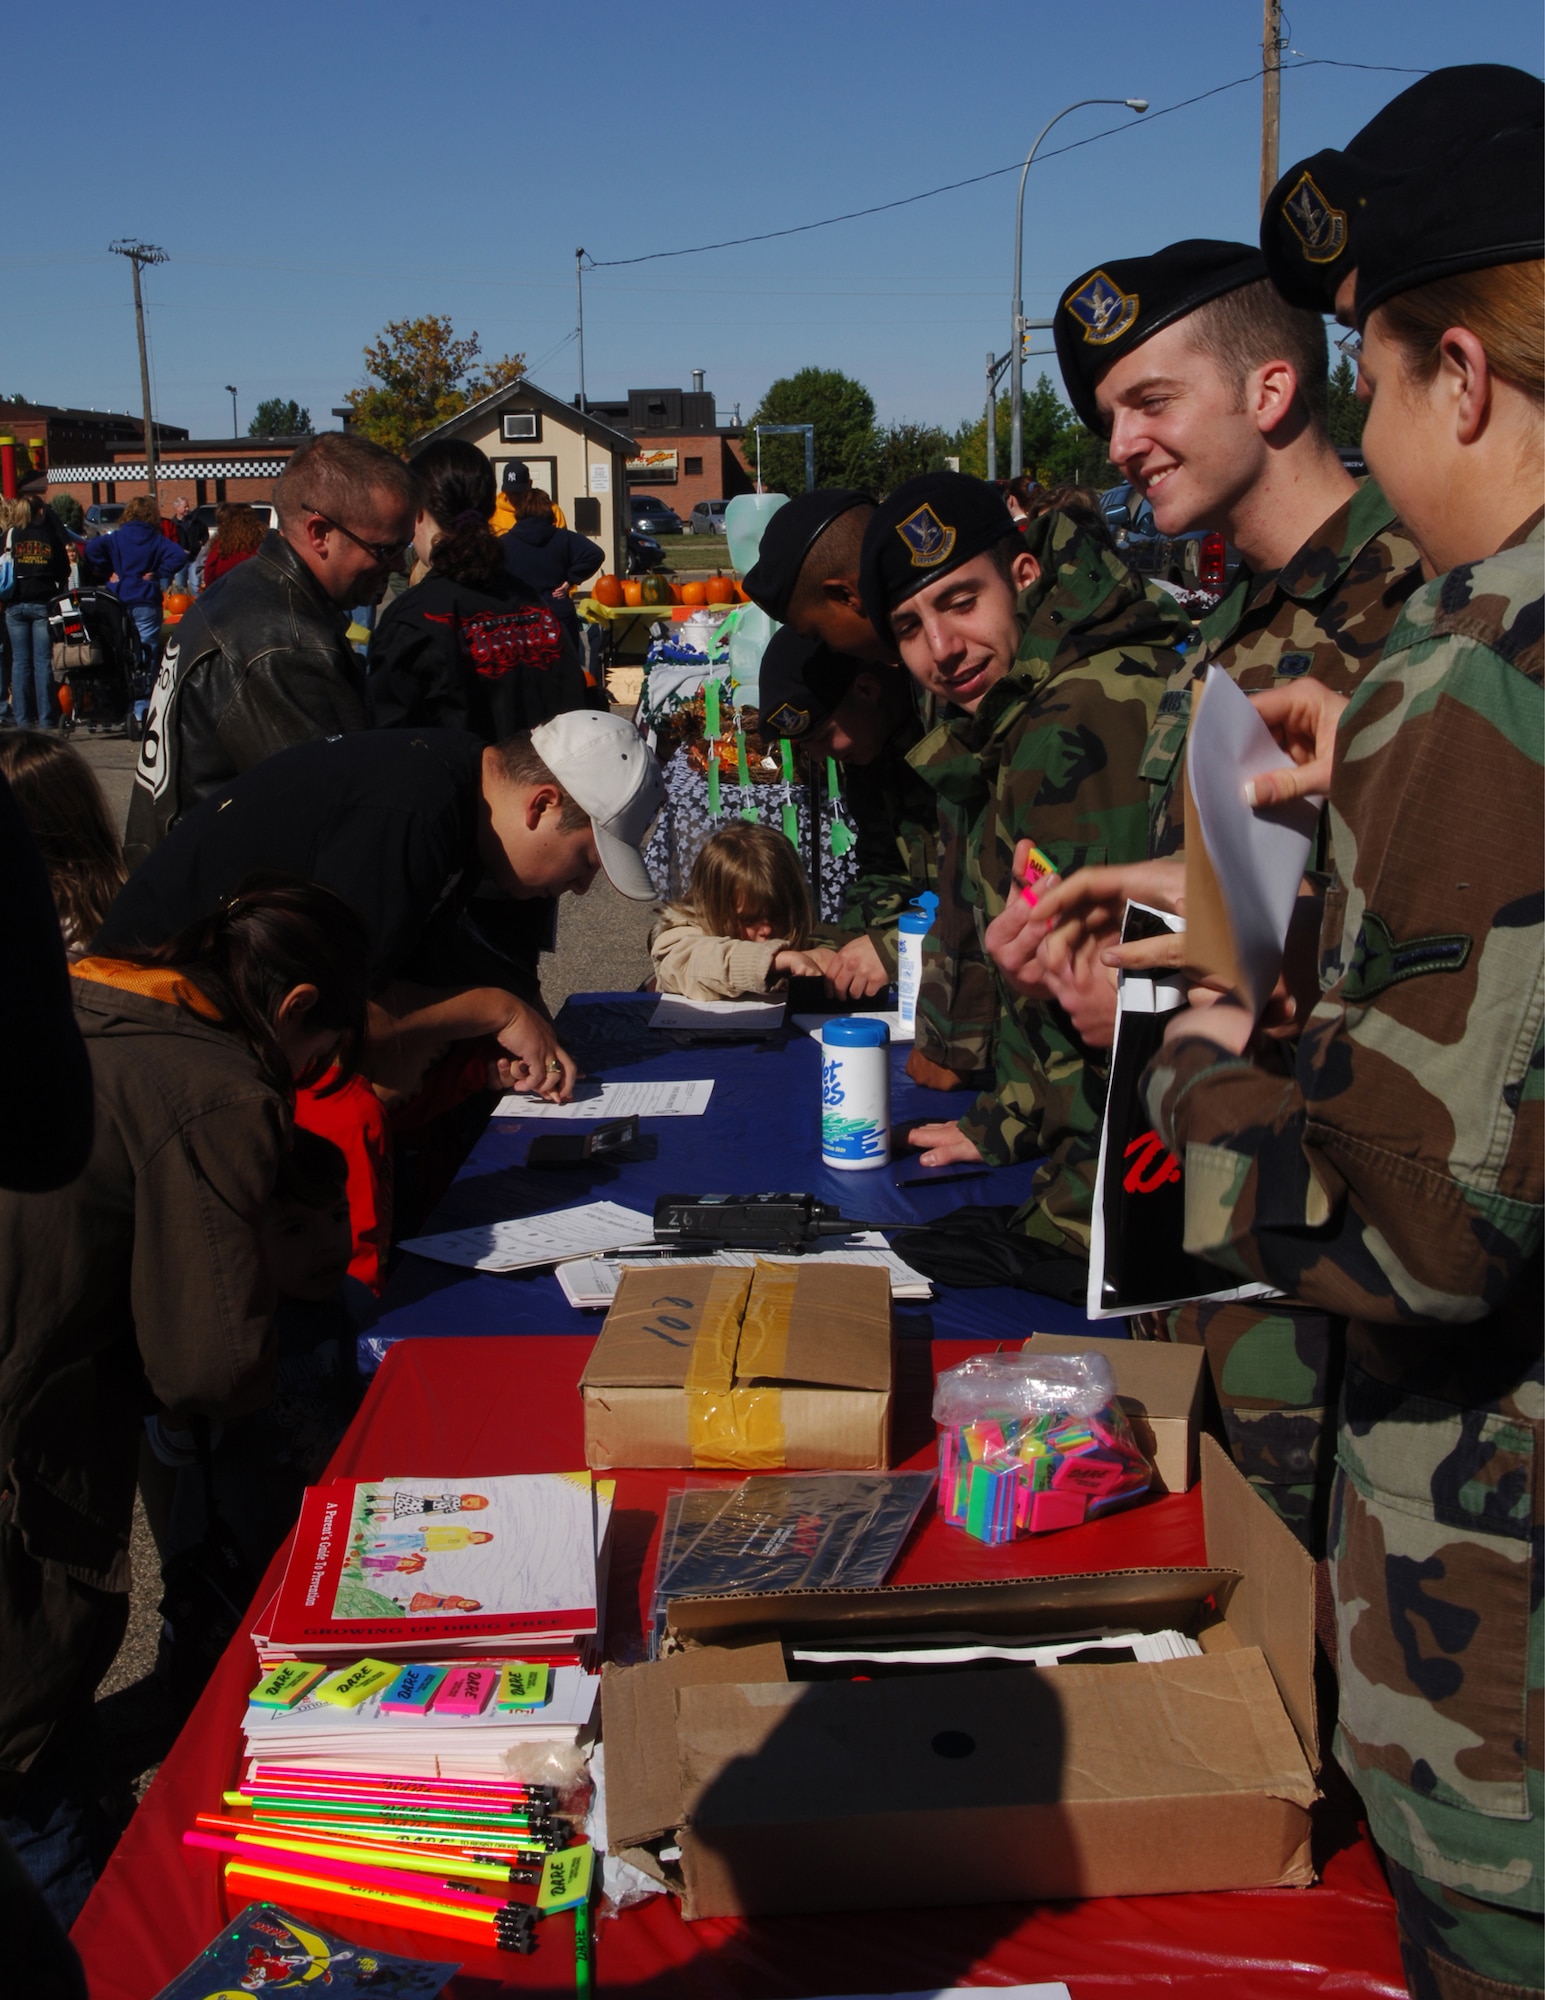 MINOT AIR FORCE BASE, N.D. -- Members from the 5th Security Forces Squadron take fingerprints and promote the Drug Abuse Resistance Education Program here during  fall festival Sept. 23. The fall festival is an annual base event to kick-start the fall season. (U.S. Air Force photo by Airman 1st Class Joe Rivera) 